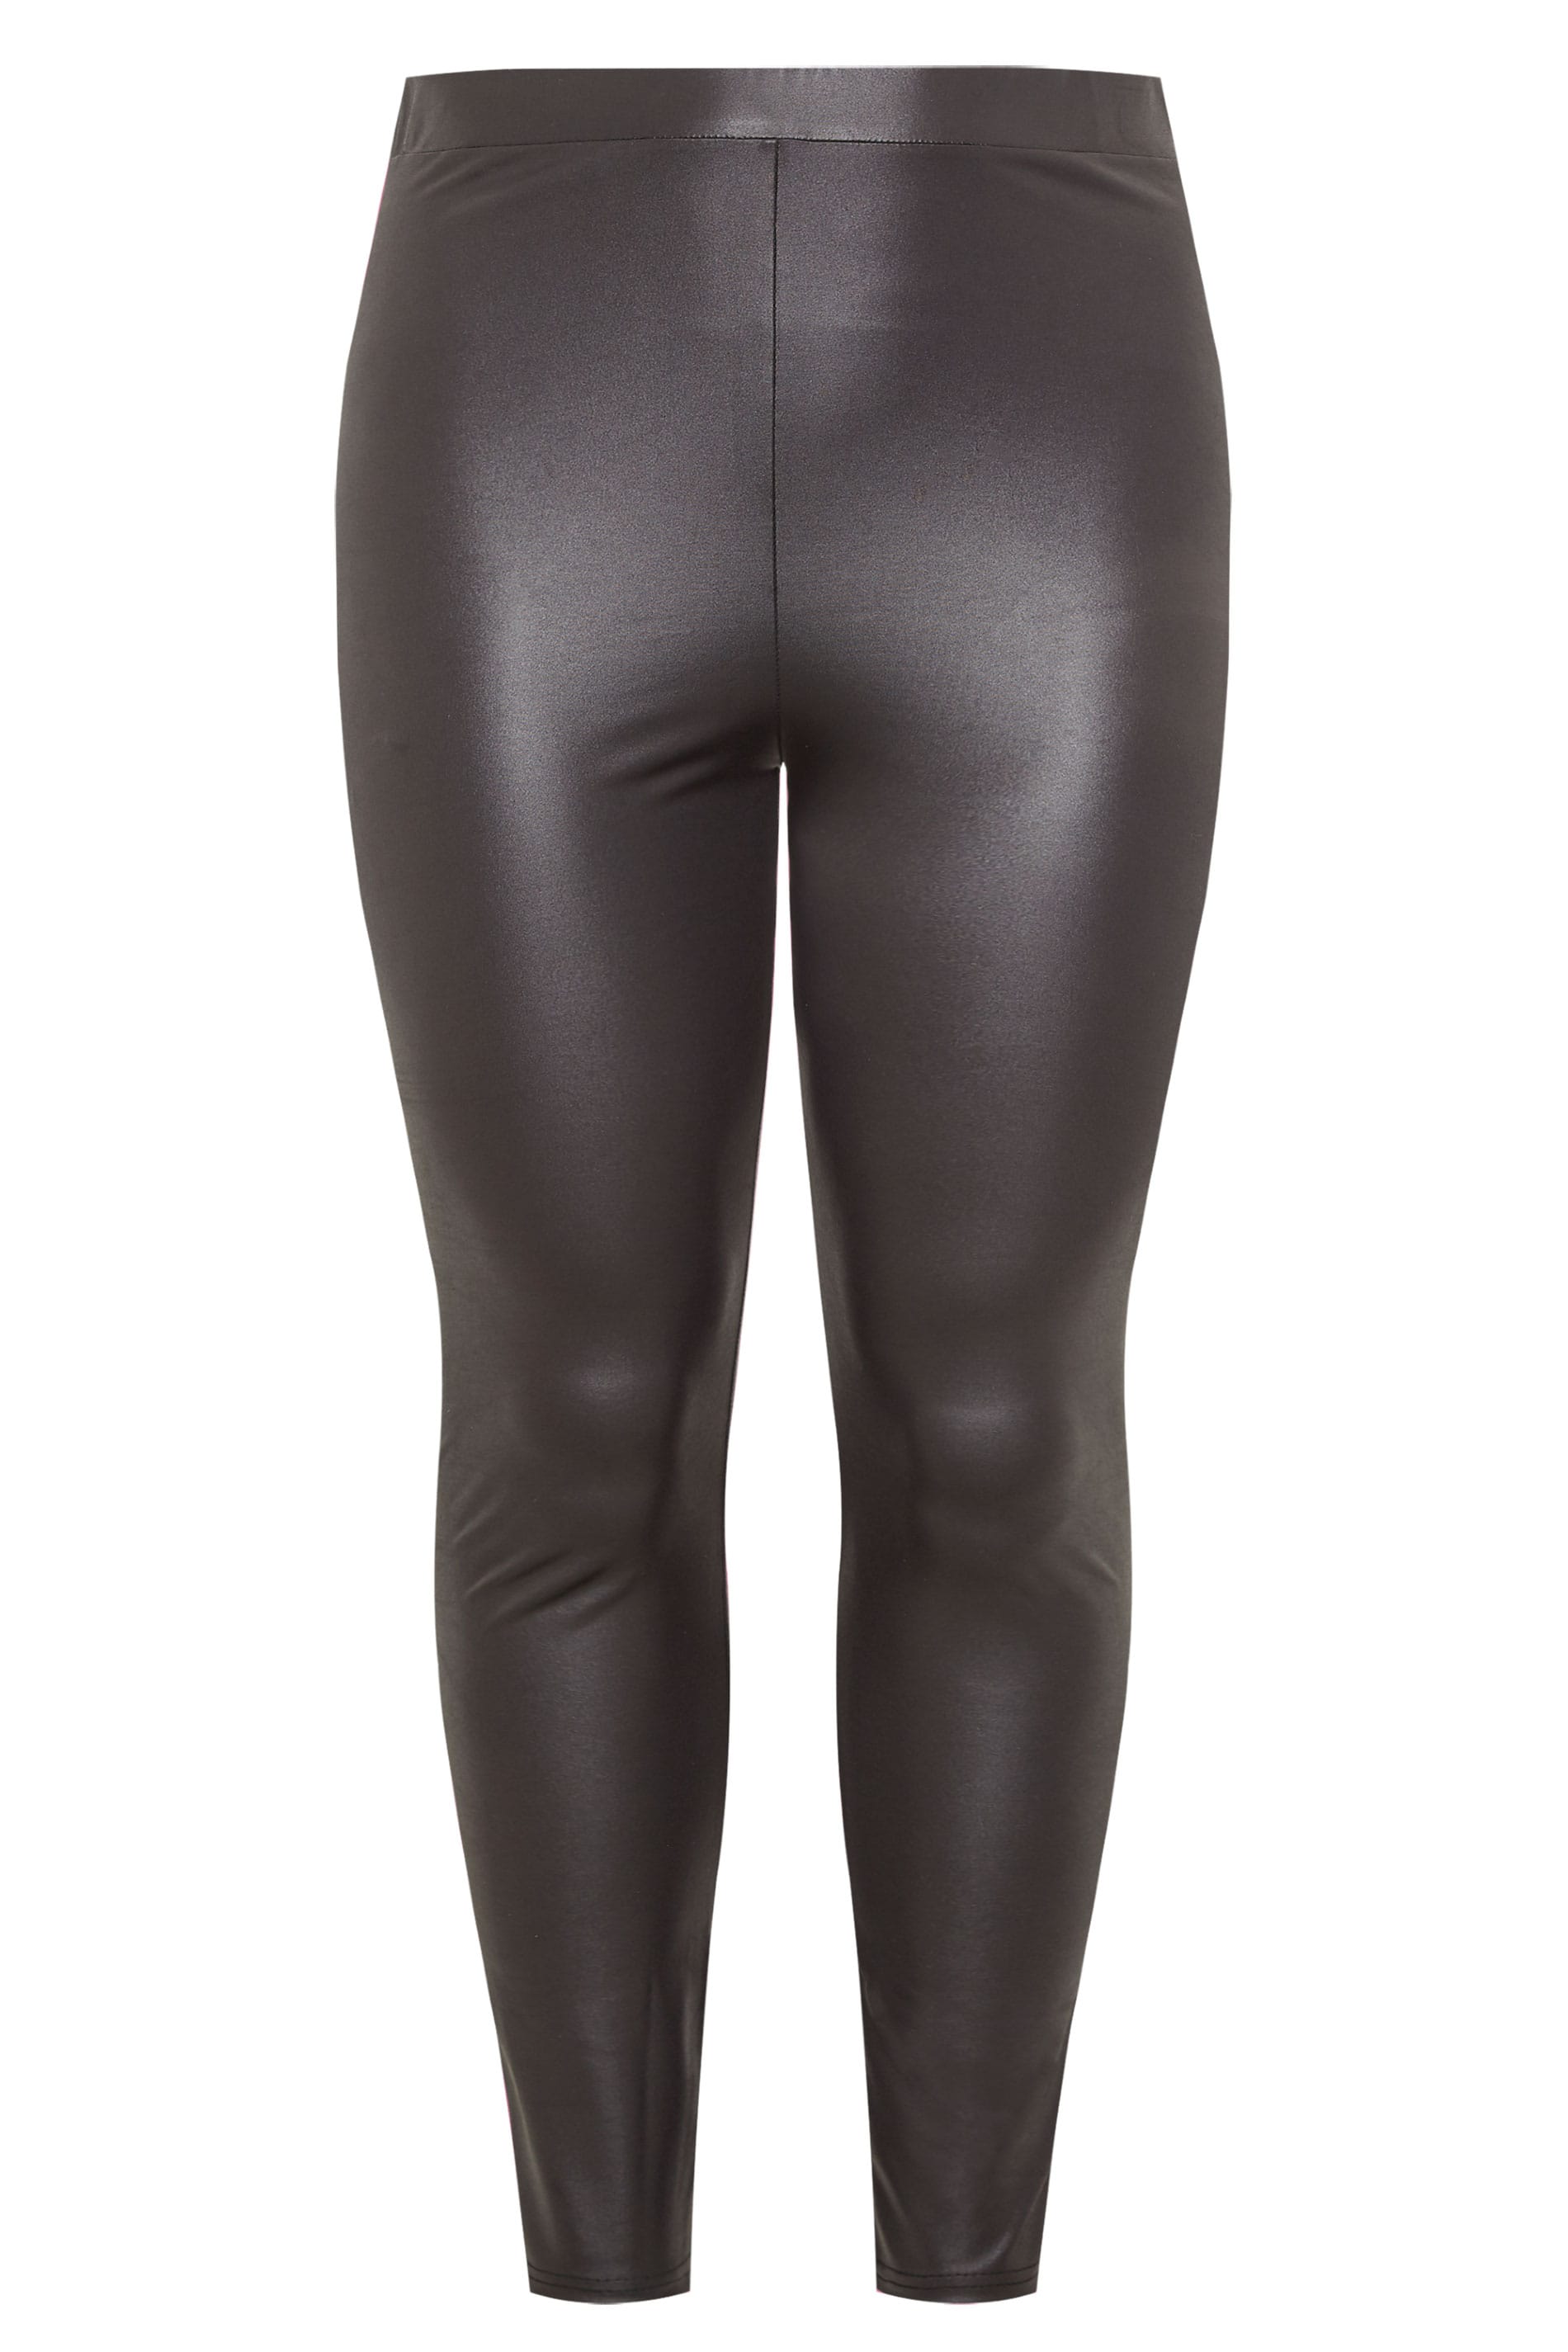 Plus Size Black Leather Look Leggings | Yours Clothing